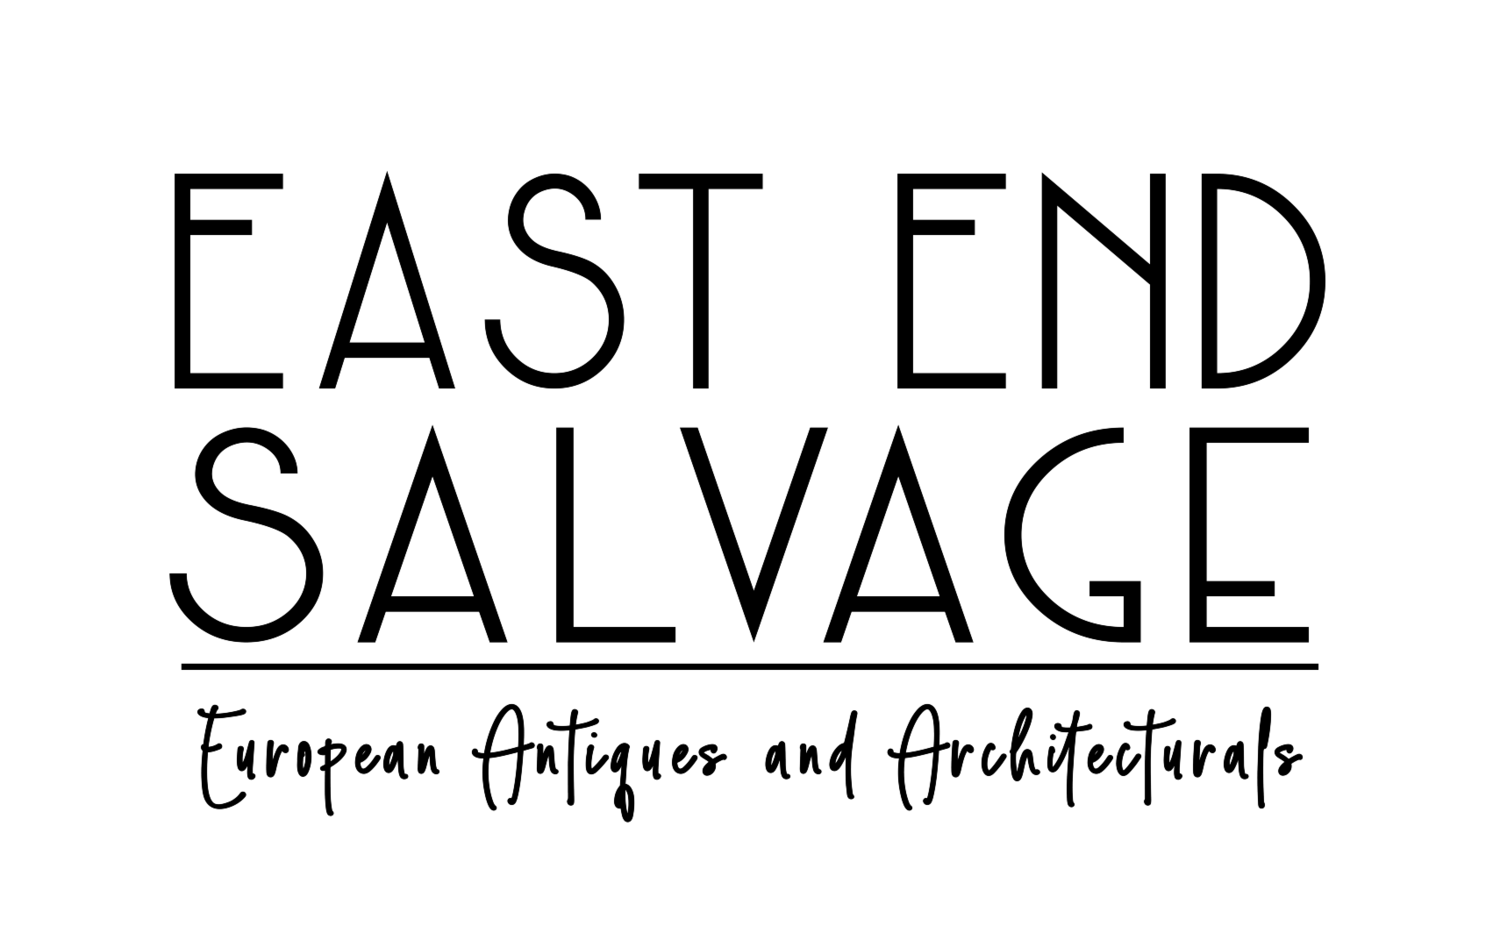 East End Salvage